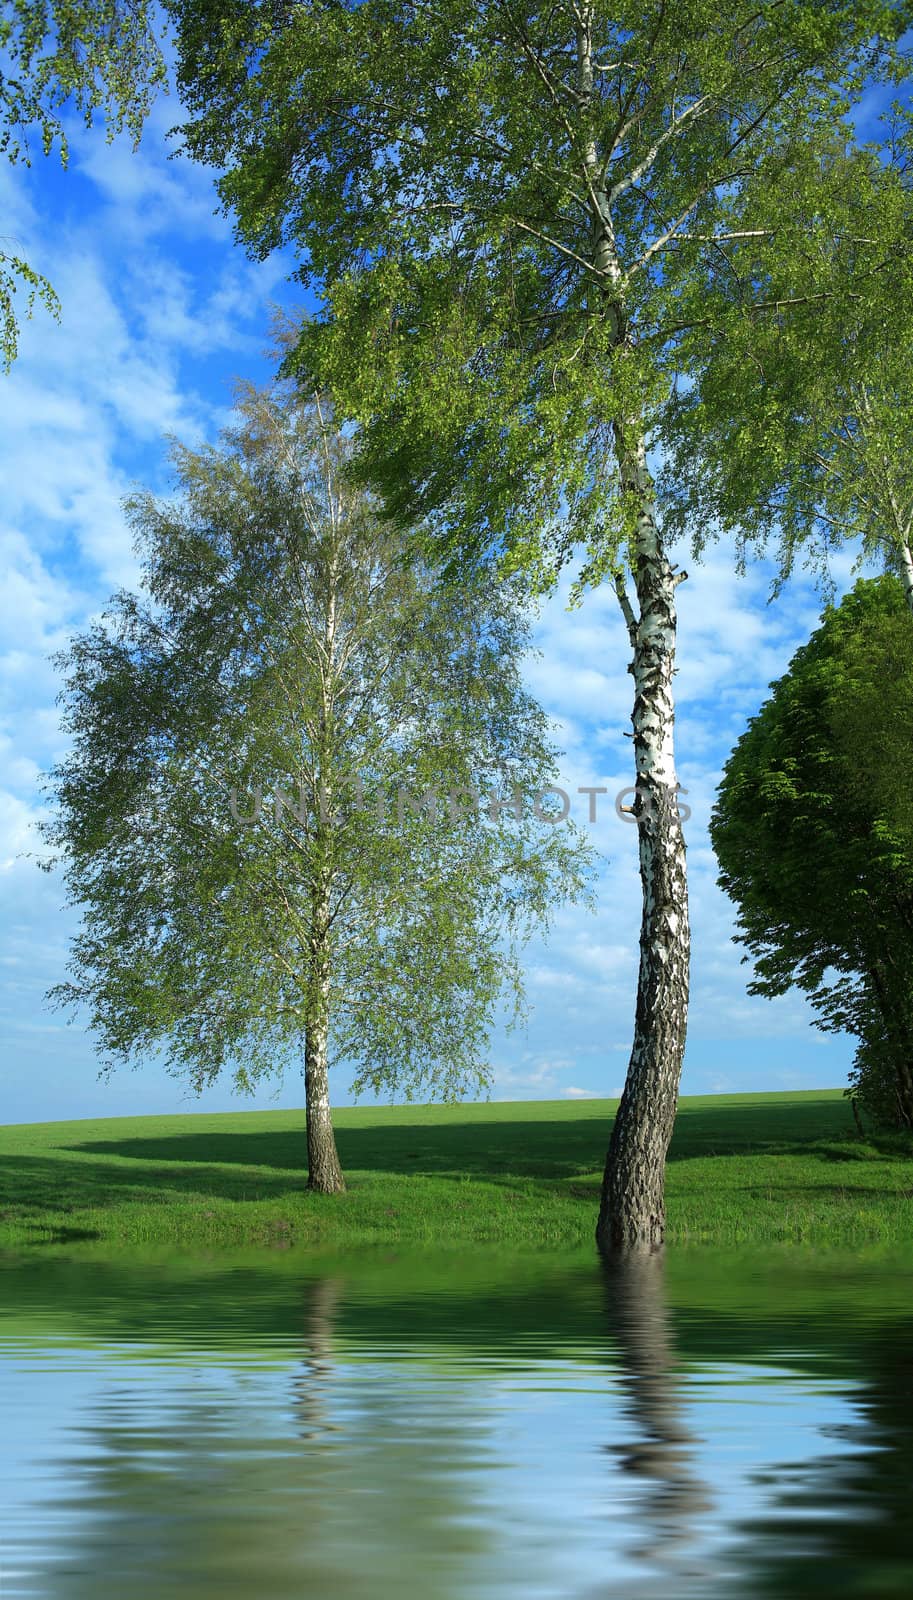 An image of two birches in the field